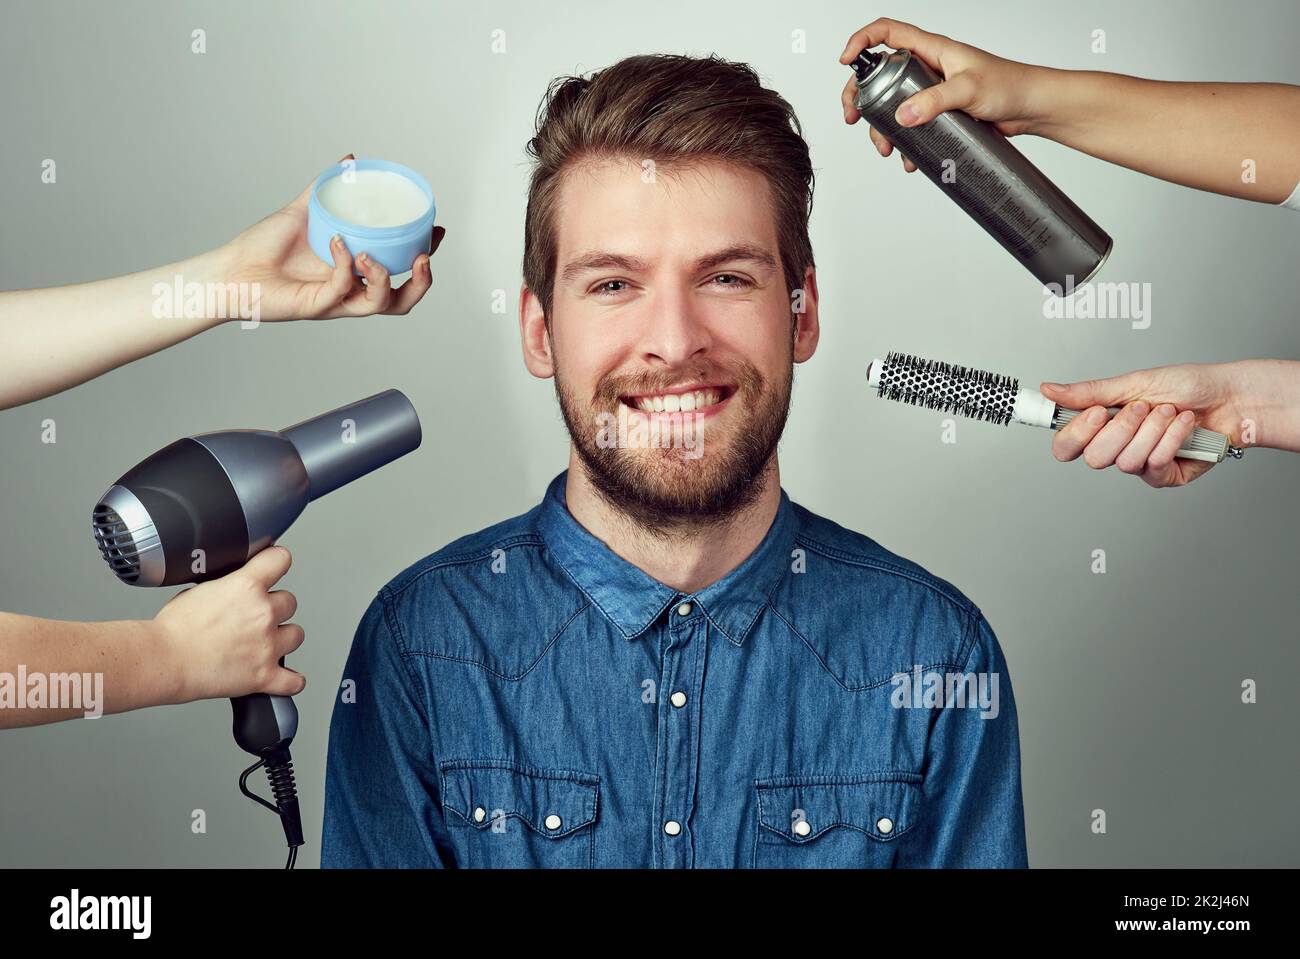 Mix up your look with a makeover. Studio portrait of a young man getting a hair makeover against a gray background. Stock Photo